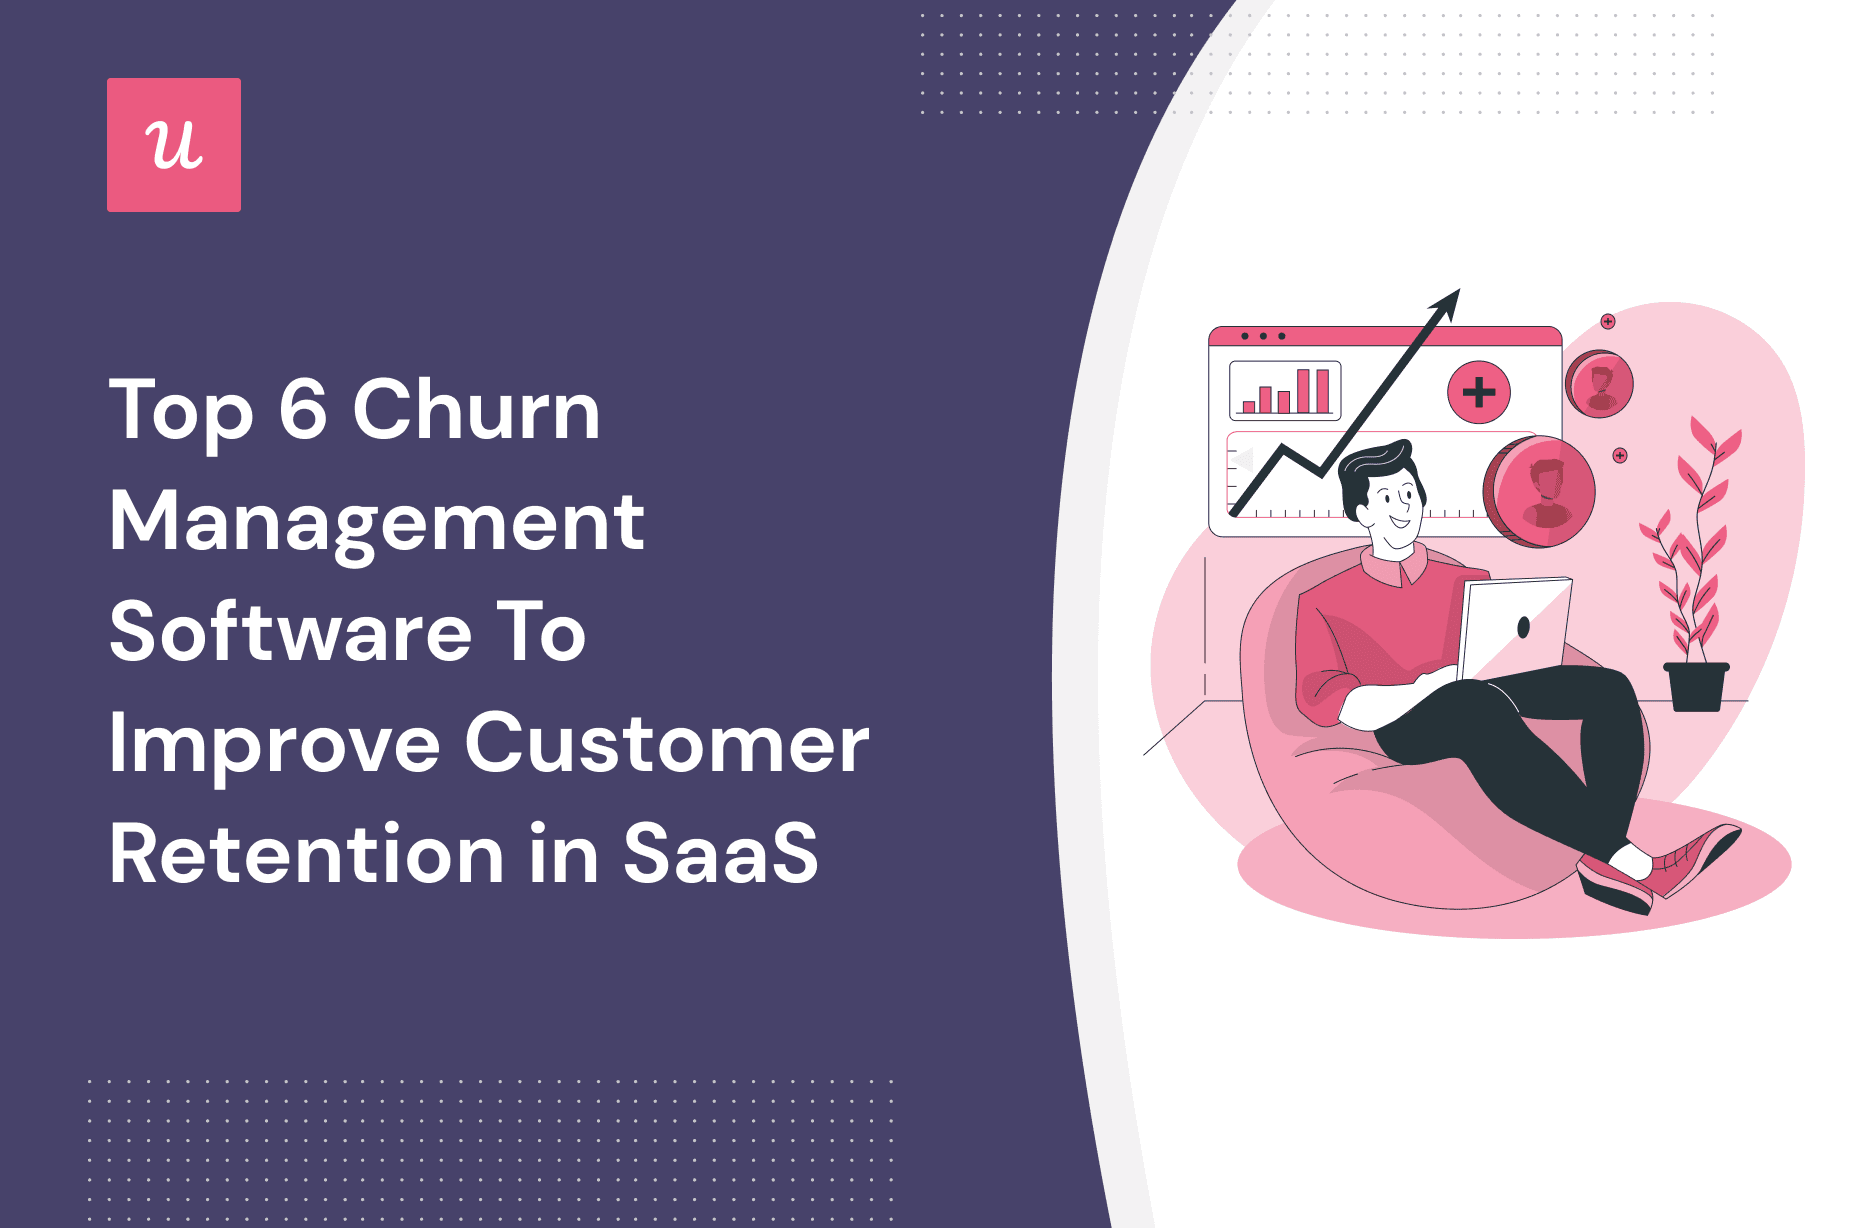 Top 6 Churn Management Software To Improve Customer Retention in SaaS cover